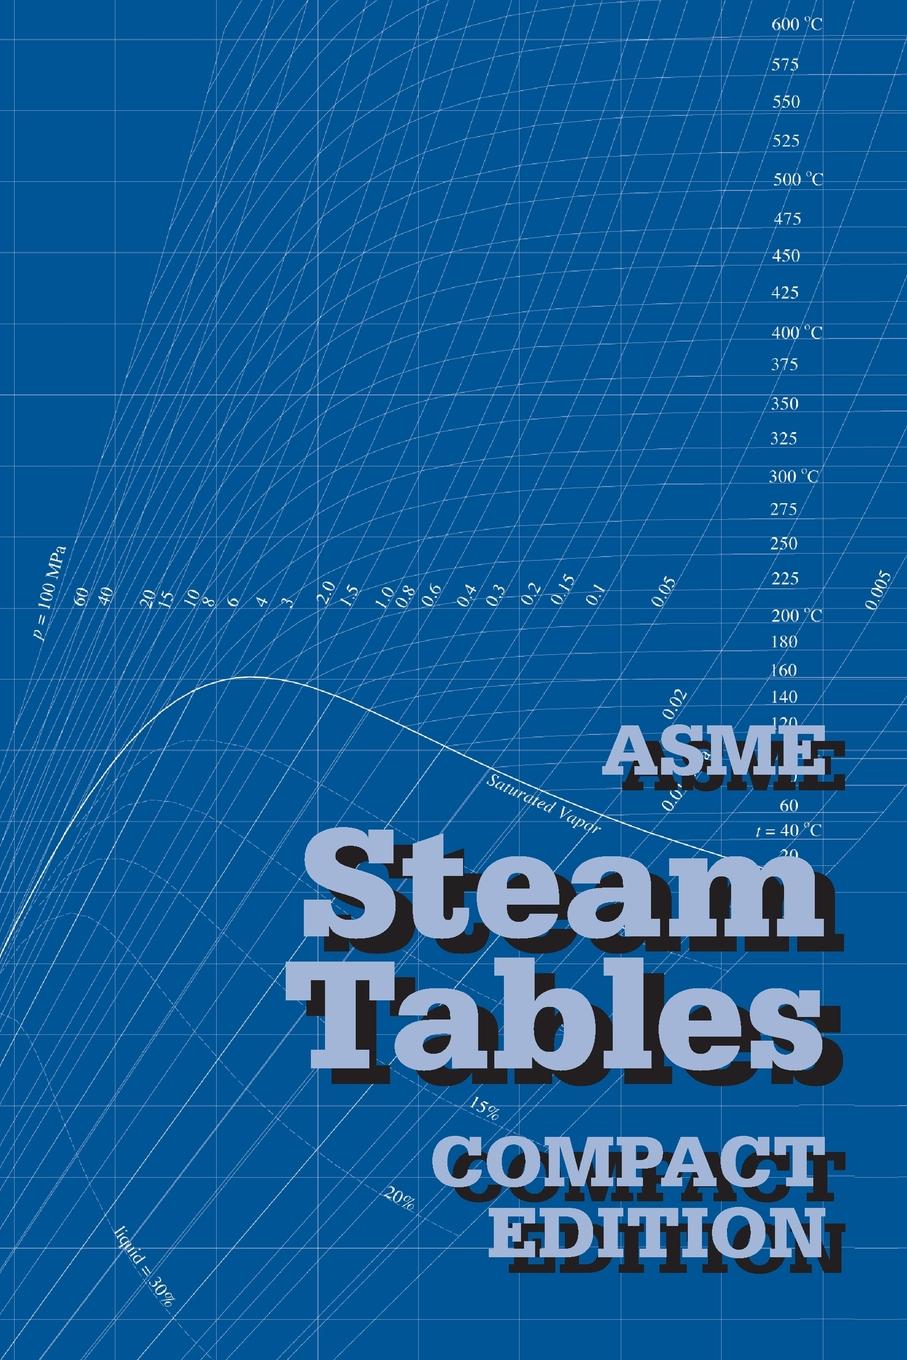 Steam tables are used for (118) фото